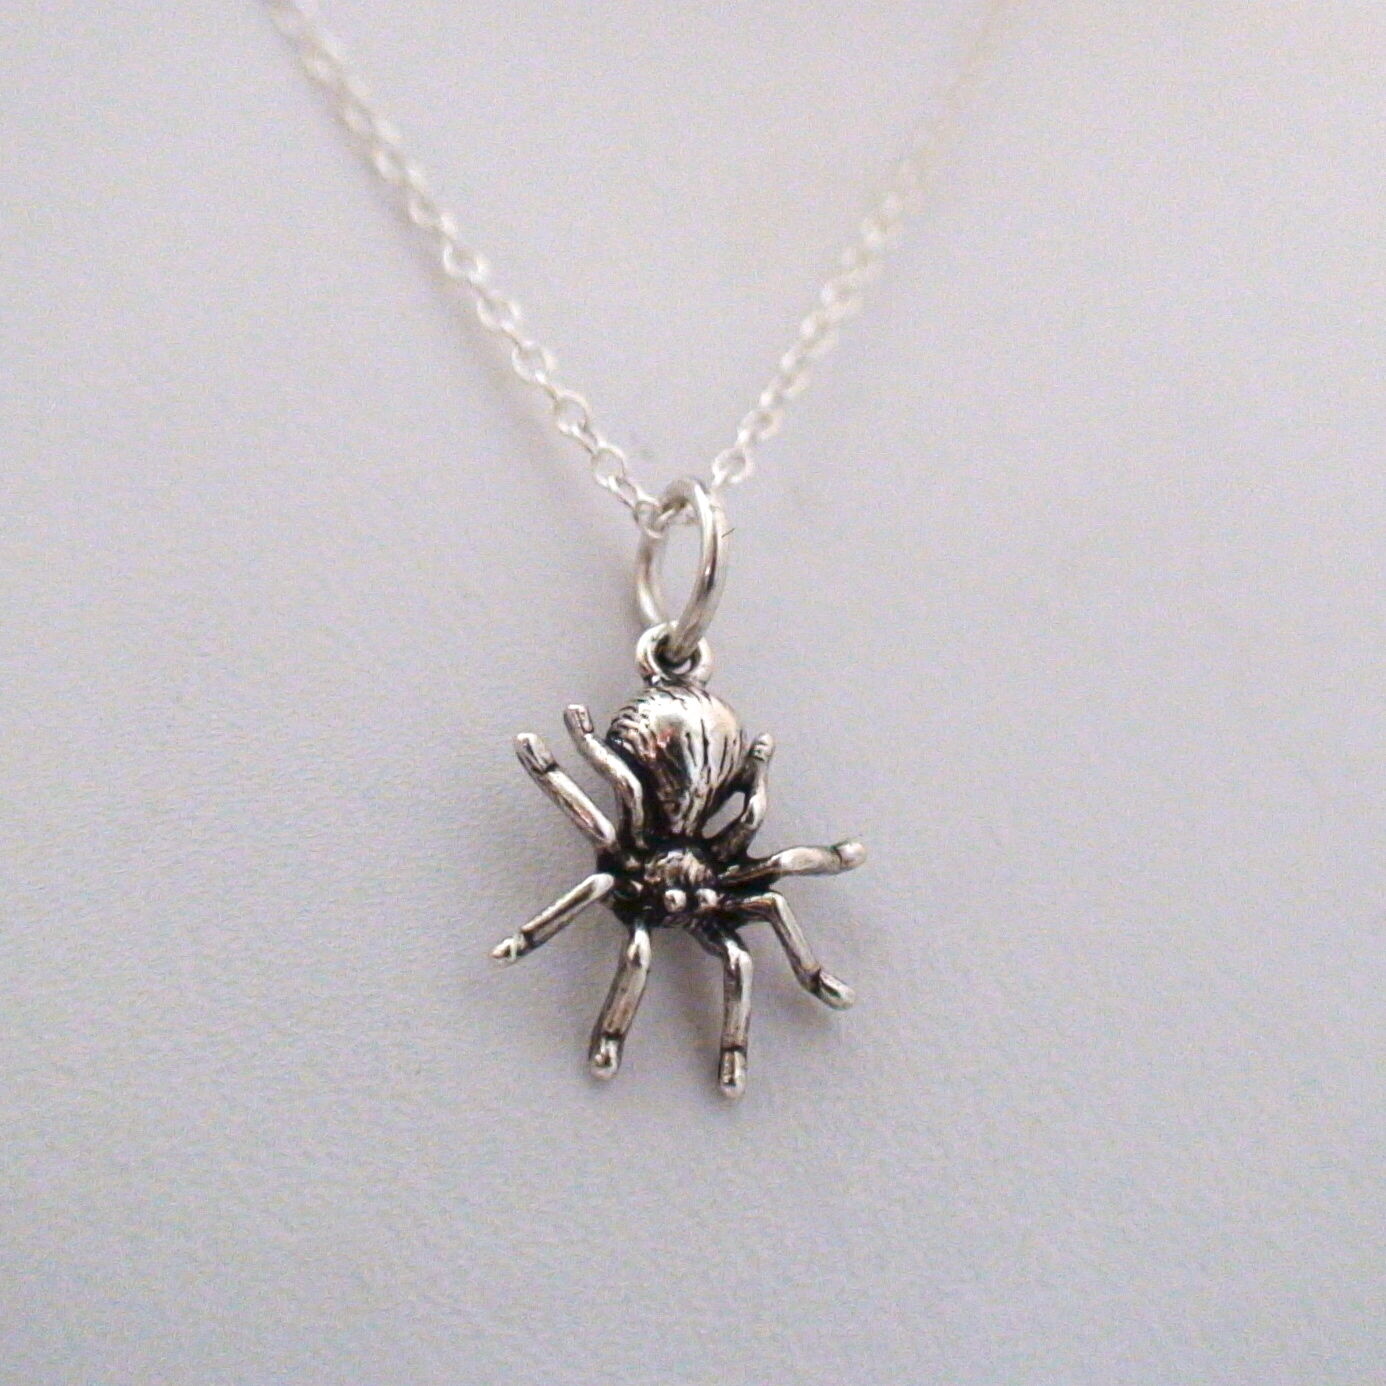 Tiny Spider Necklace - 925 Sterling Silver - Spider Insect Arachnid Creepy *NEW 